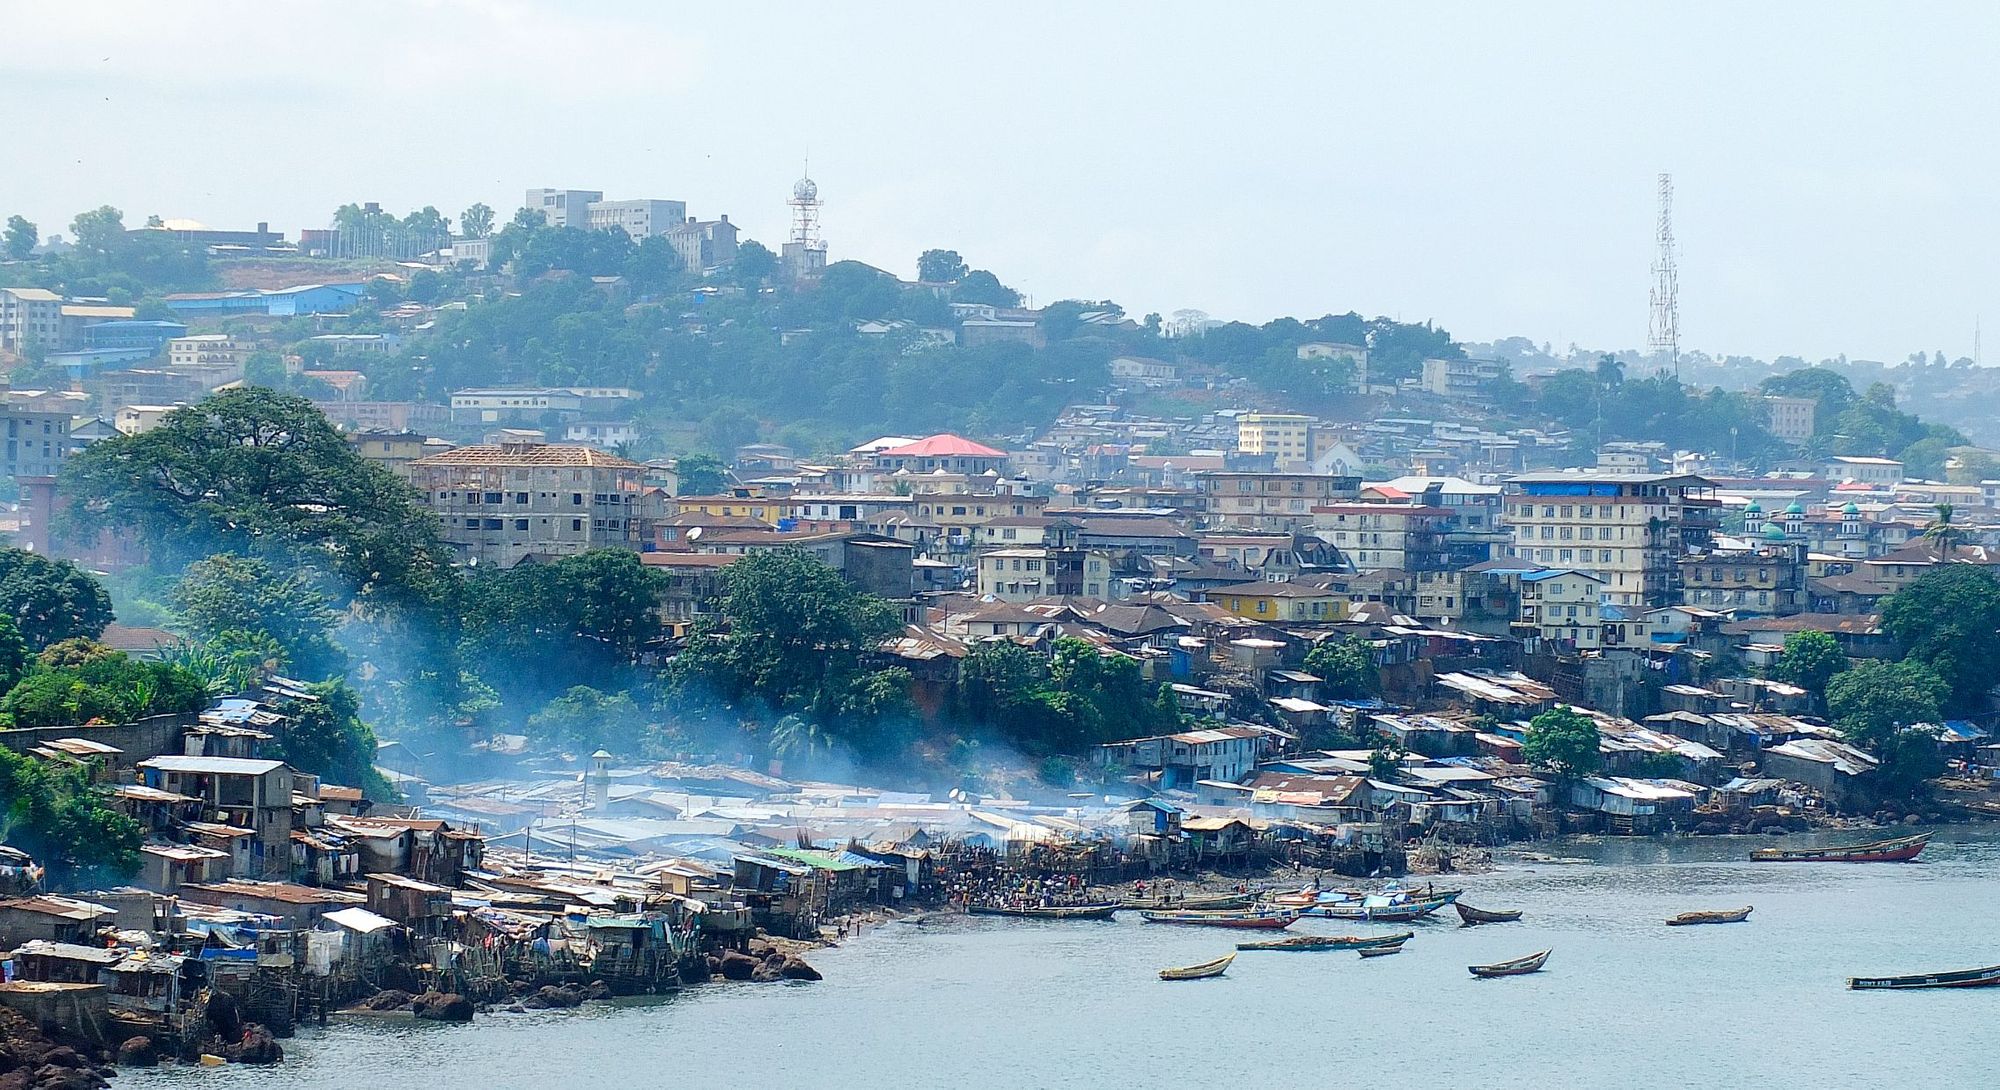 The city of Freetown in Sierra Leone, the capital and largest city in the country